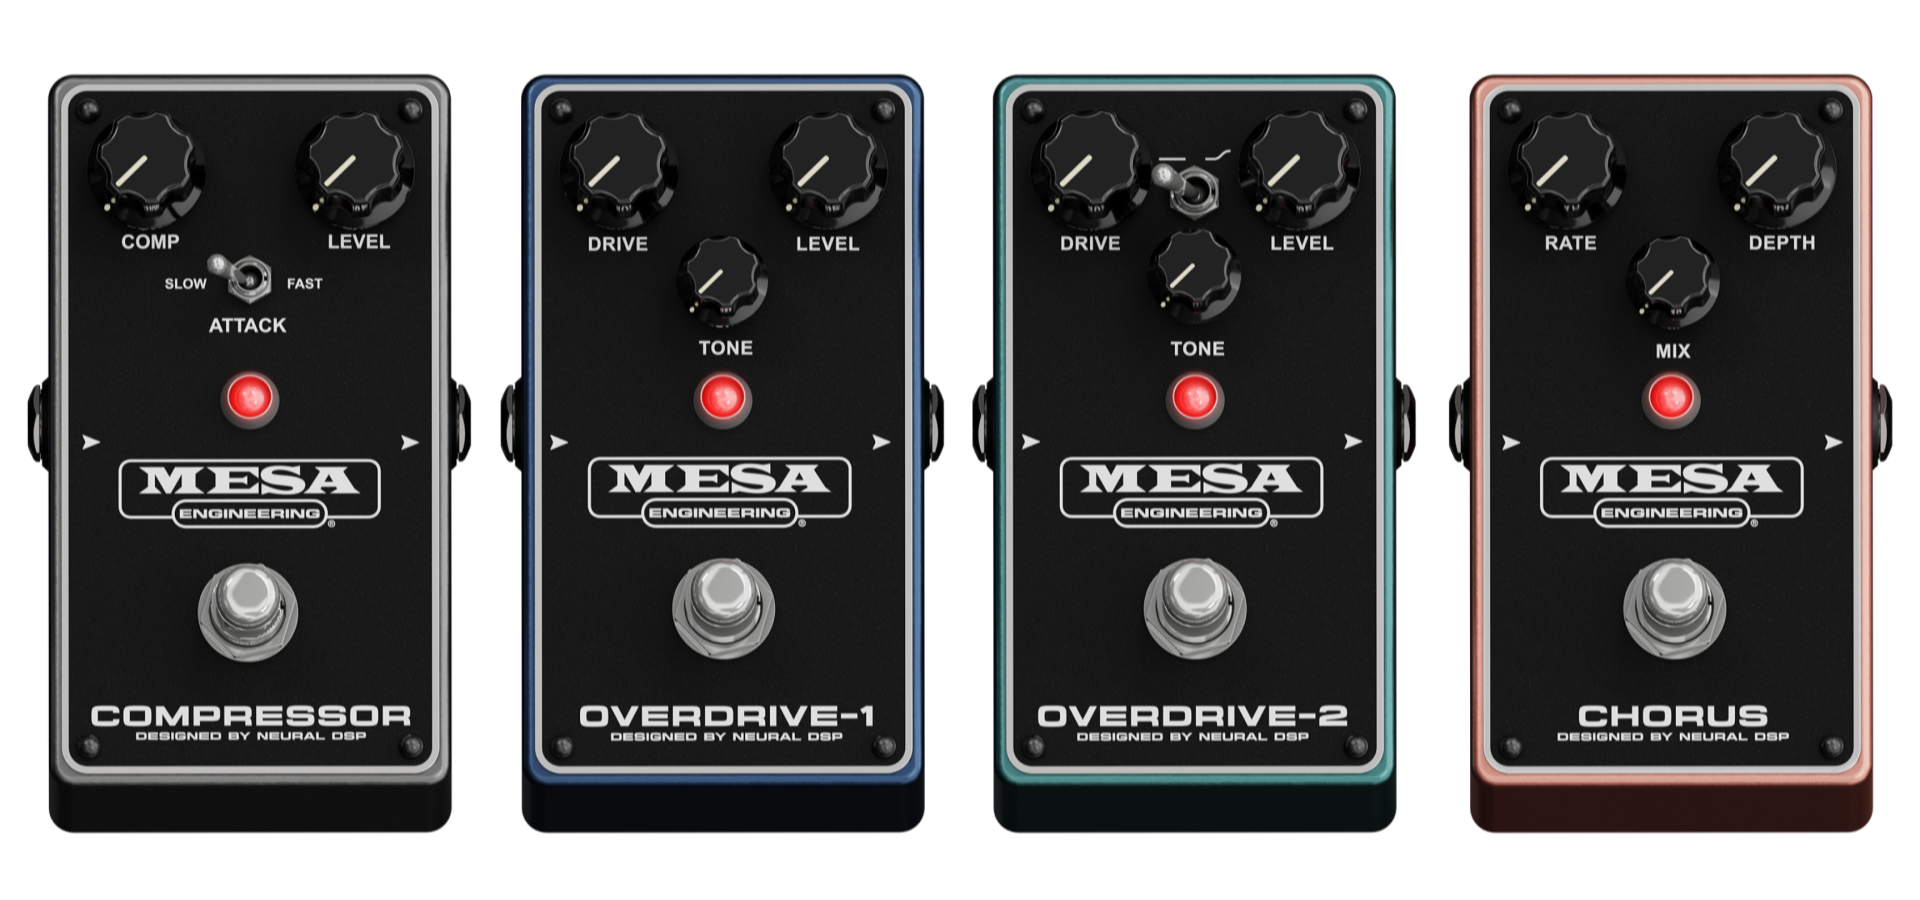 How to use an overdrive pedal - Neural DSP